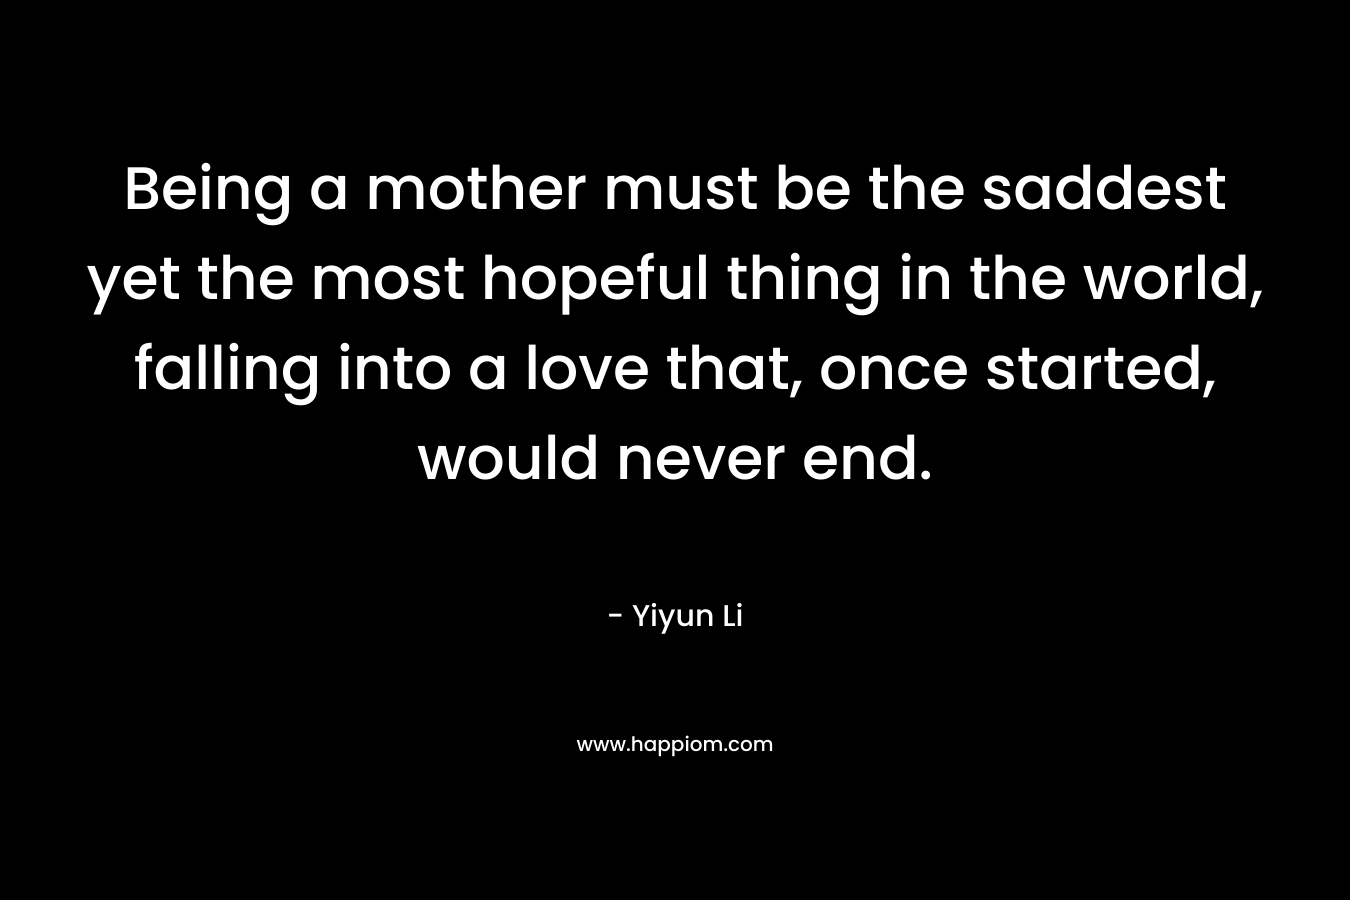 Being a mother must be the saddest yet the most hopeful thing in the world, falling into a love that, once started, would never end. – Yiyun Li